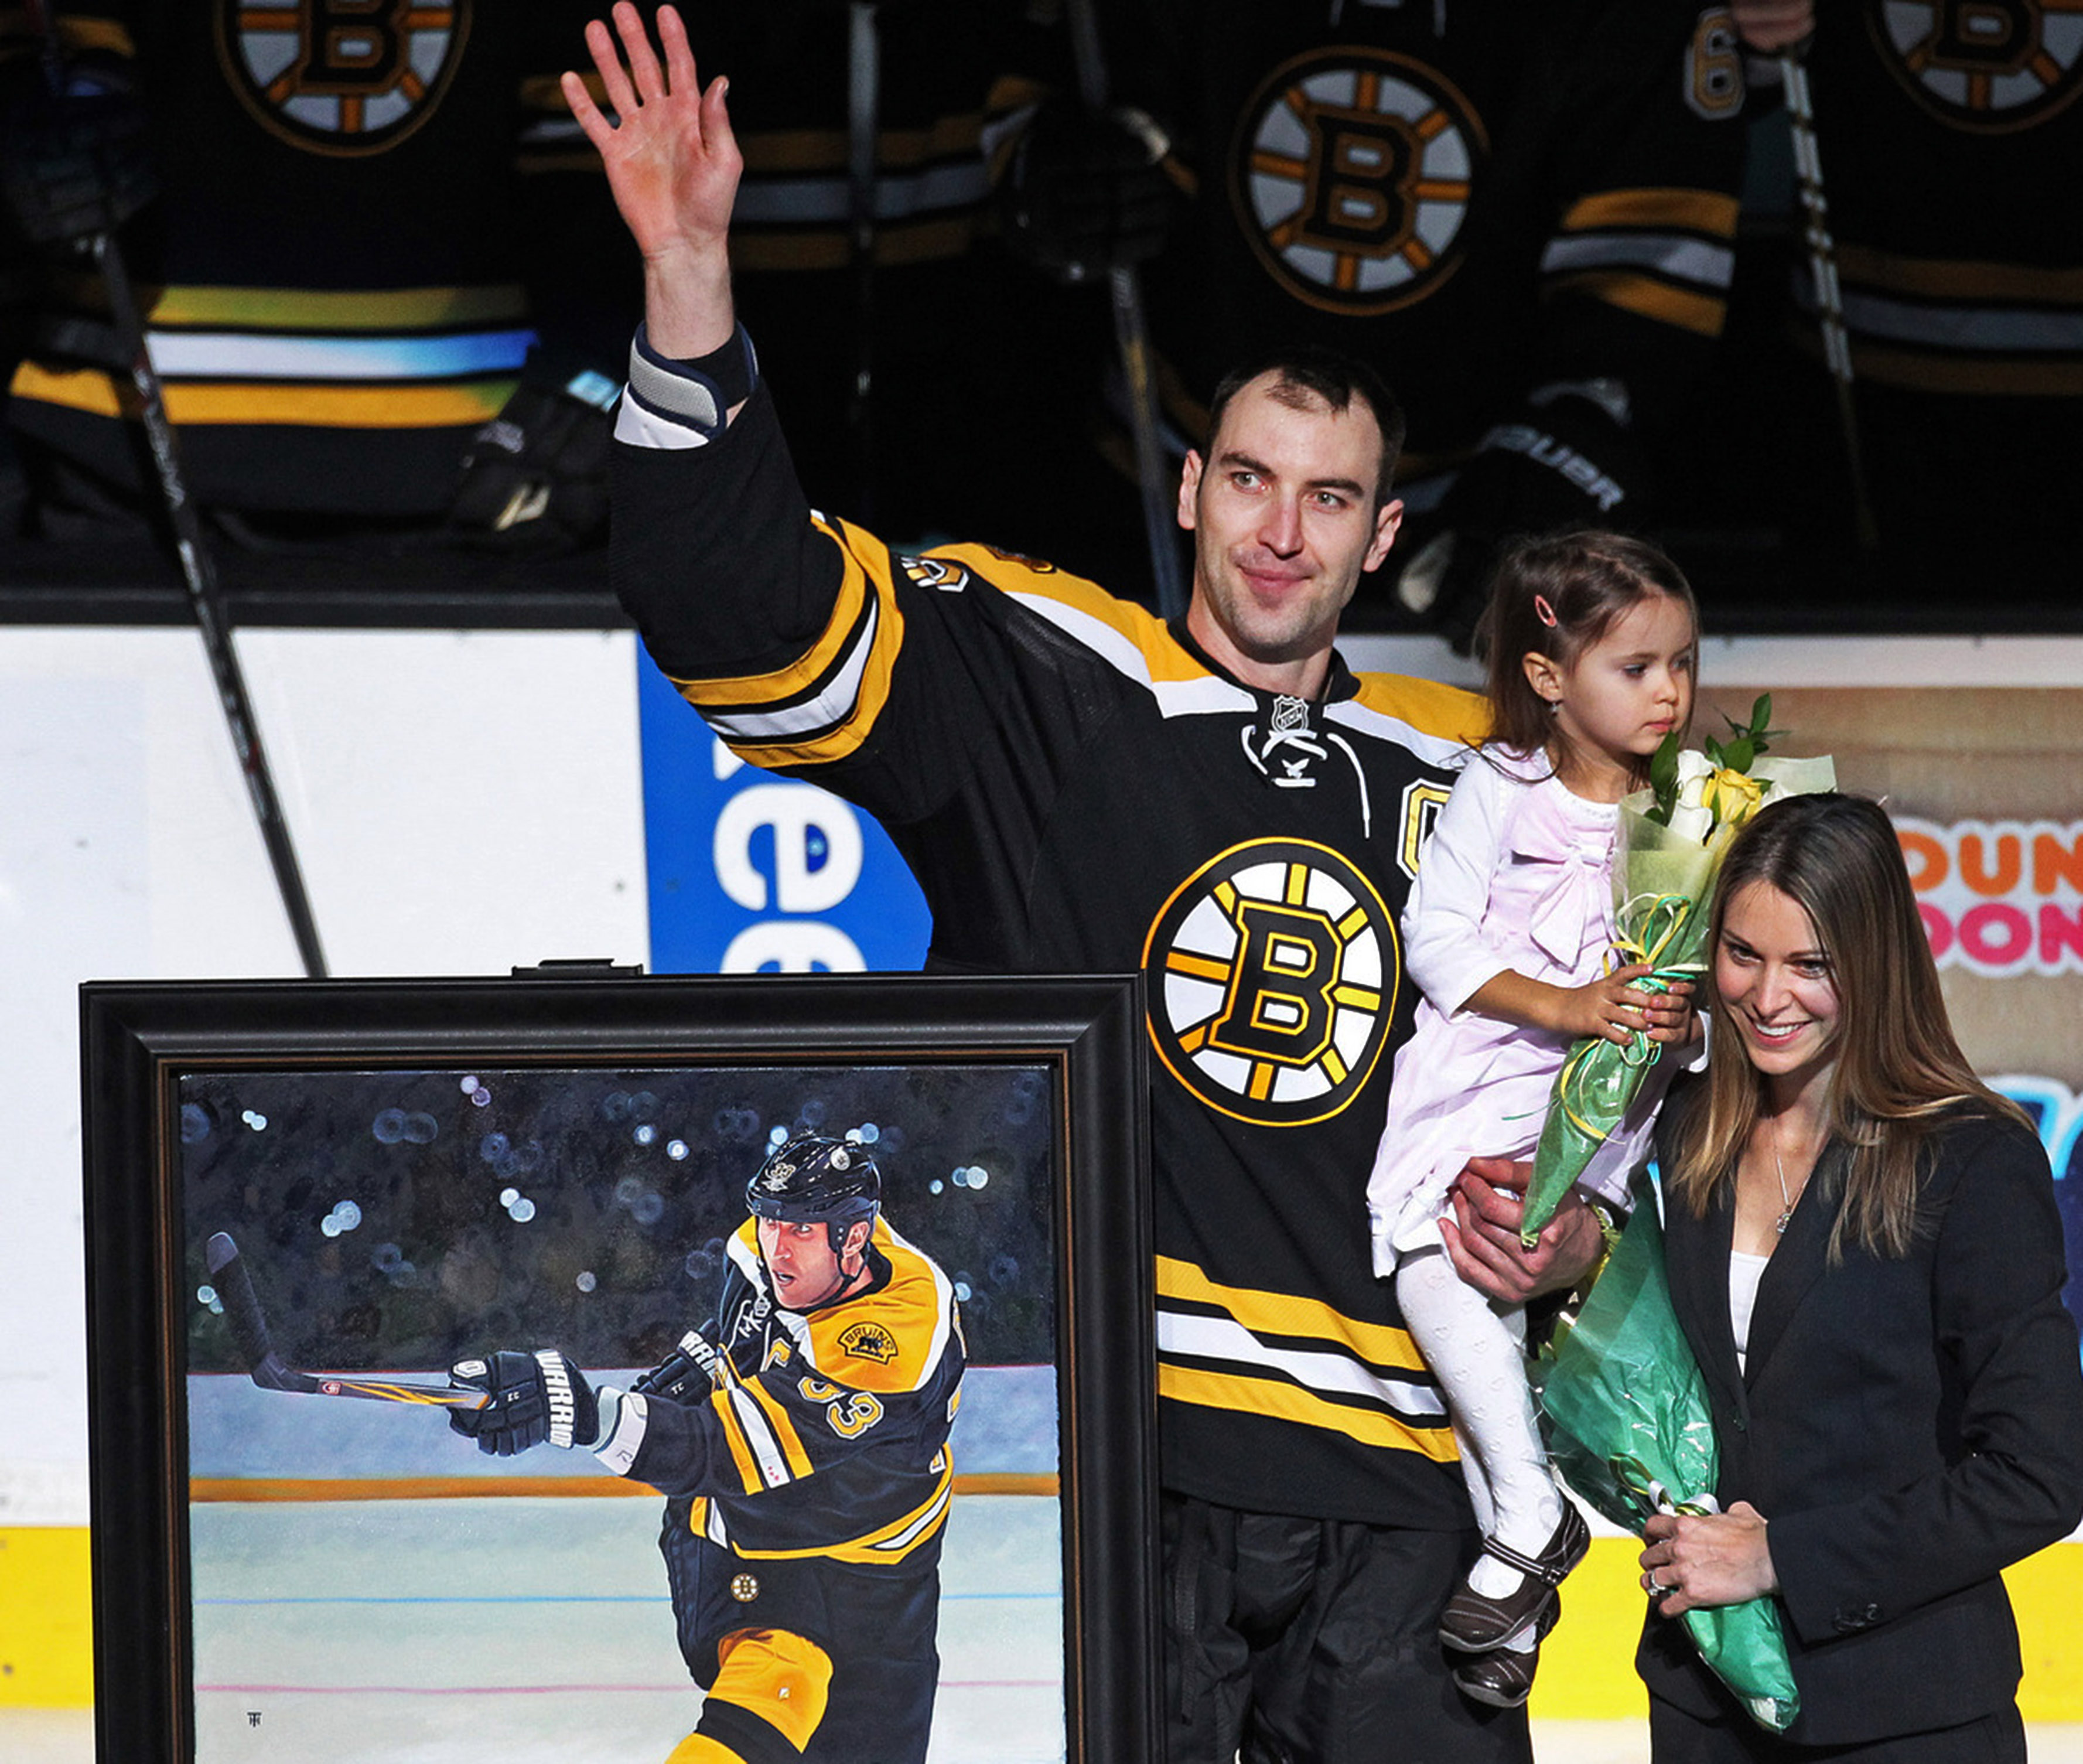 Bruins plan to honor Zdeno Chara after retirement decision